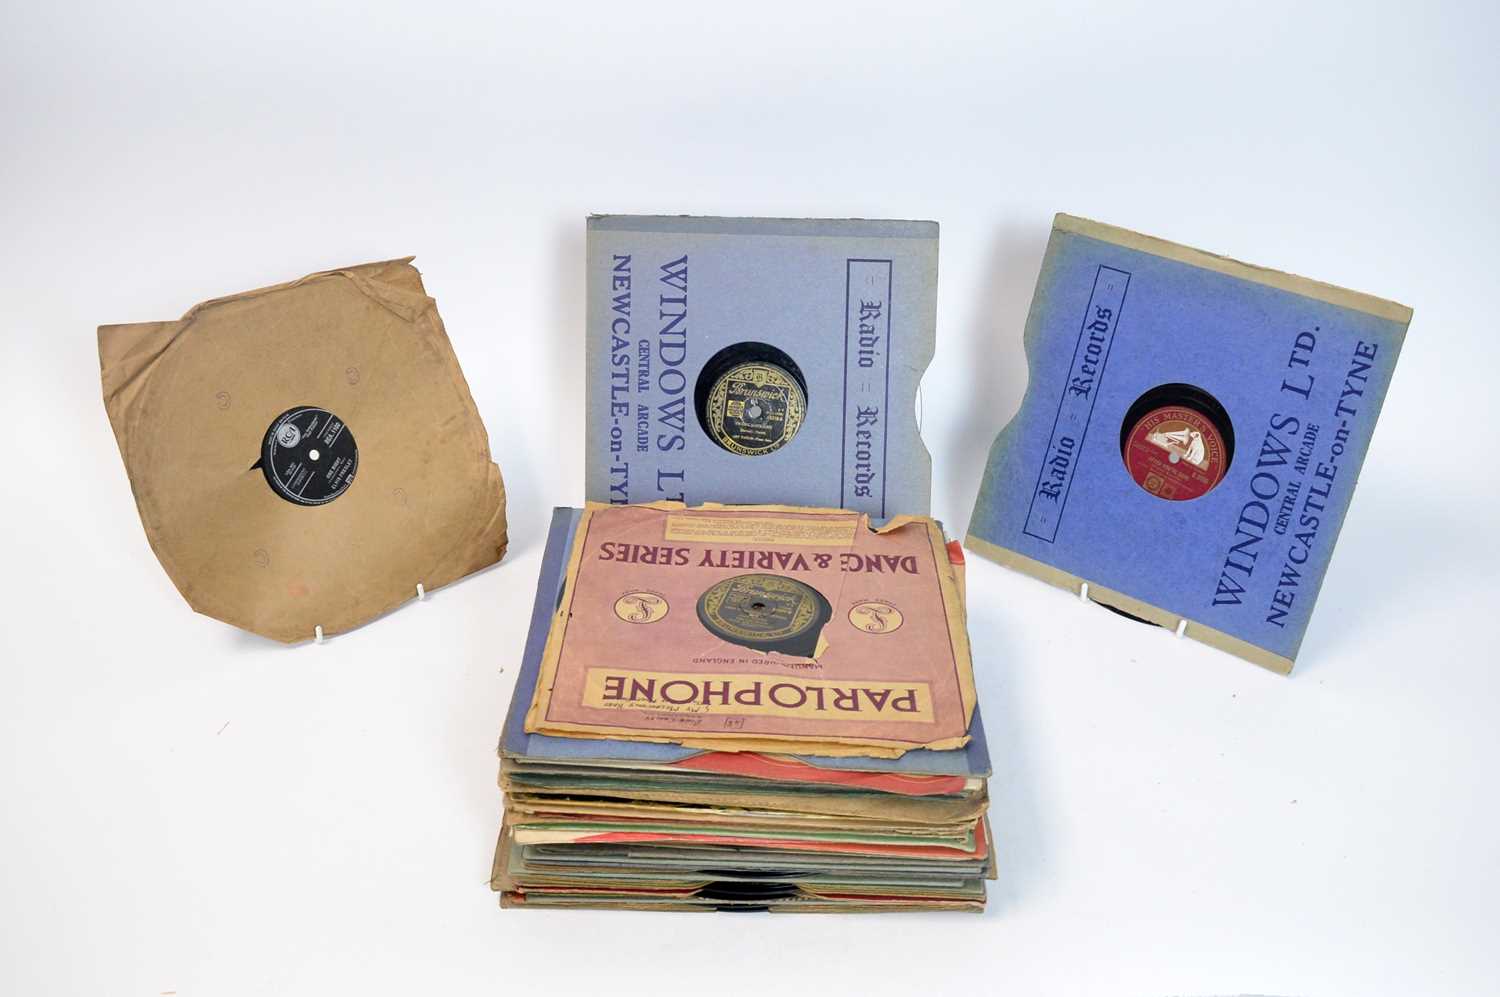 Jazz, blues and rock n' roll 78rpm shellac records